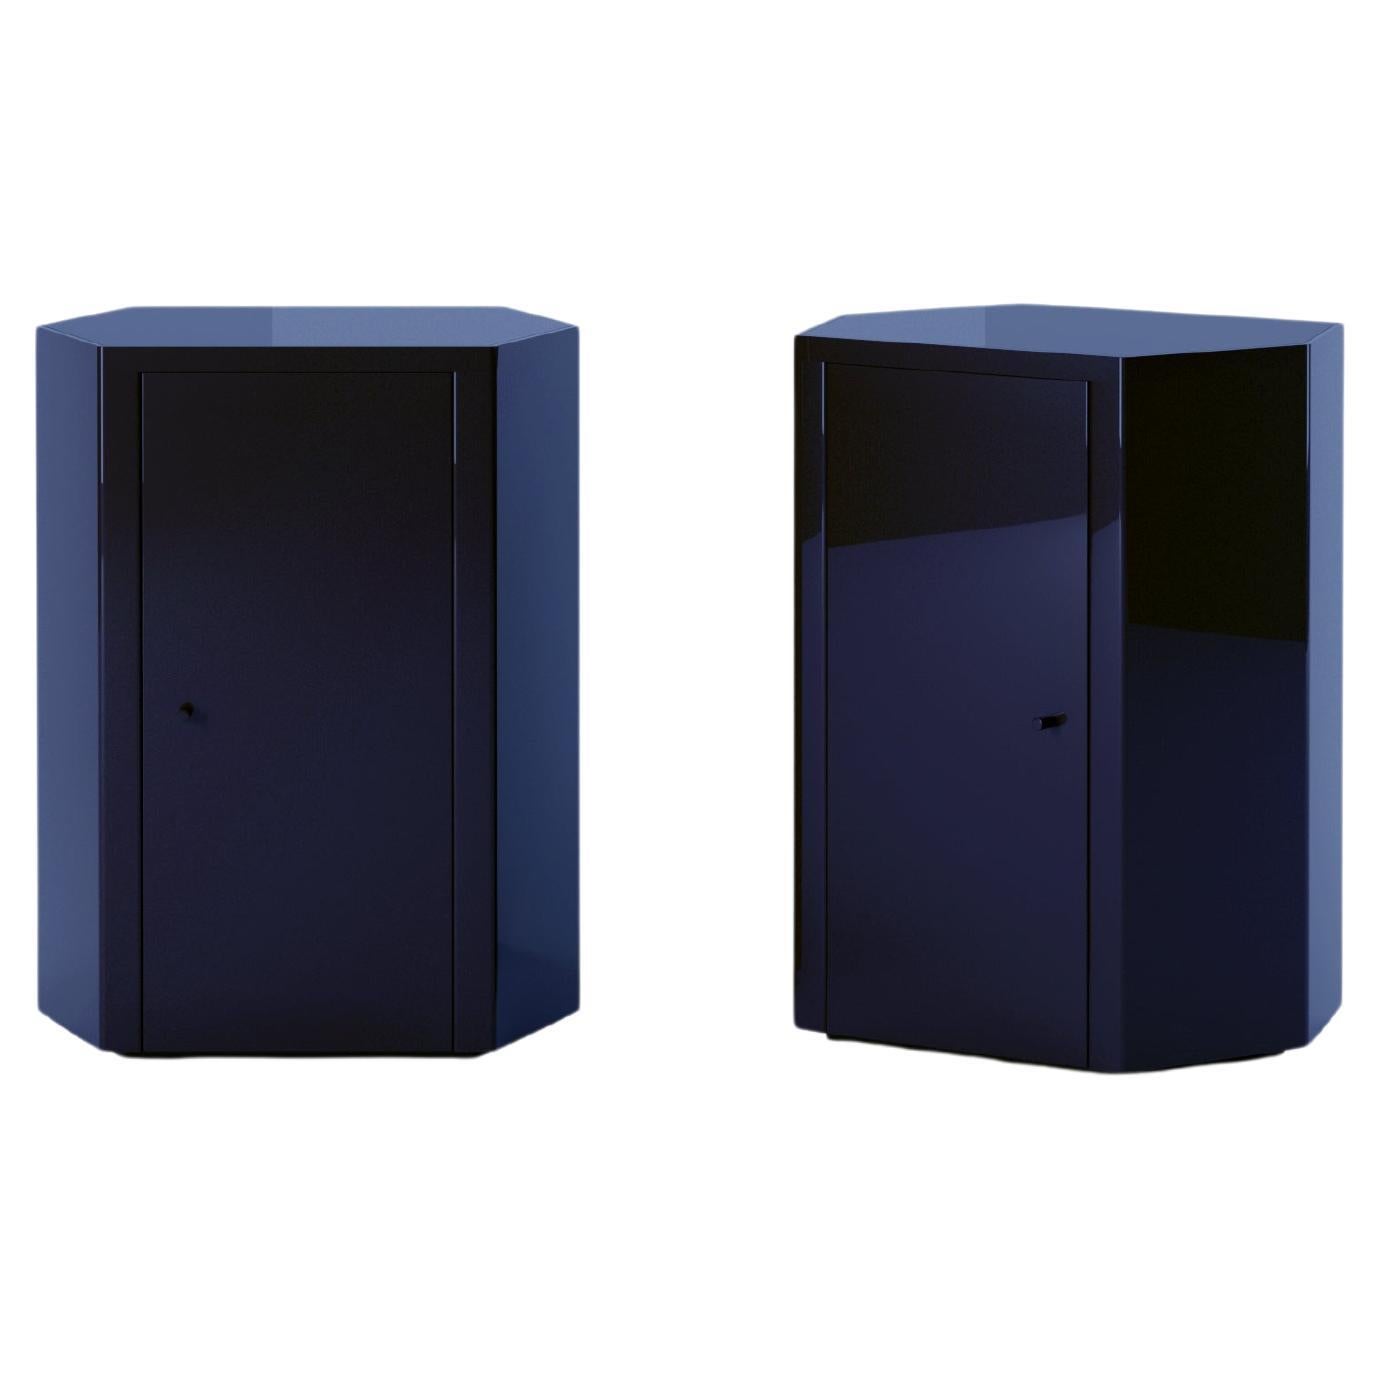 Pair of Park Night Stands in Midnight Navy Lacquer by Yaniv Chen for Lemon For Sale